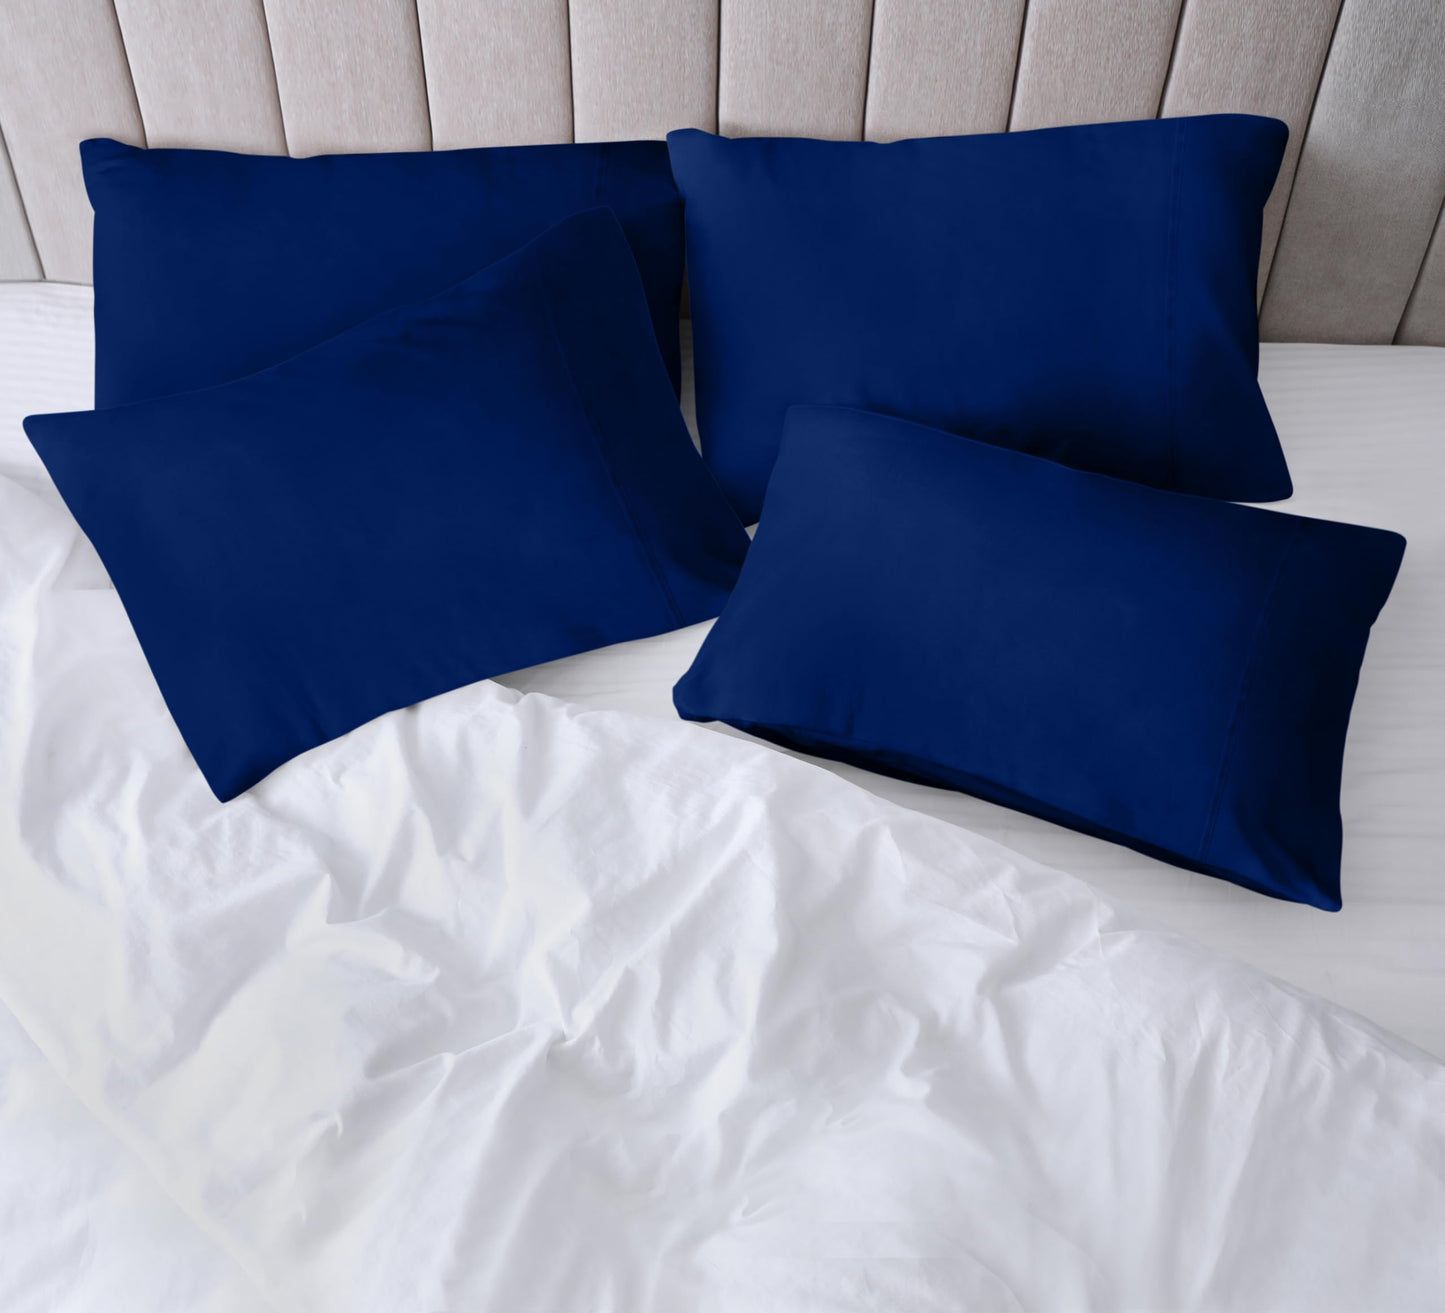 Utopia Bedding Queen Pillow Cases - 4 Pack - Envelope Closure - Soft Brushed Microfiber Fabric - Shrinkage and Fade Resistant Pillow Cases Queen Size 20 X 30 Inches (Queen, Royal Blue)